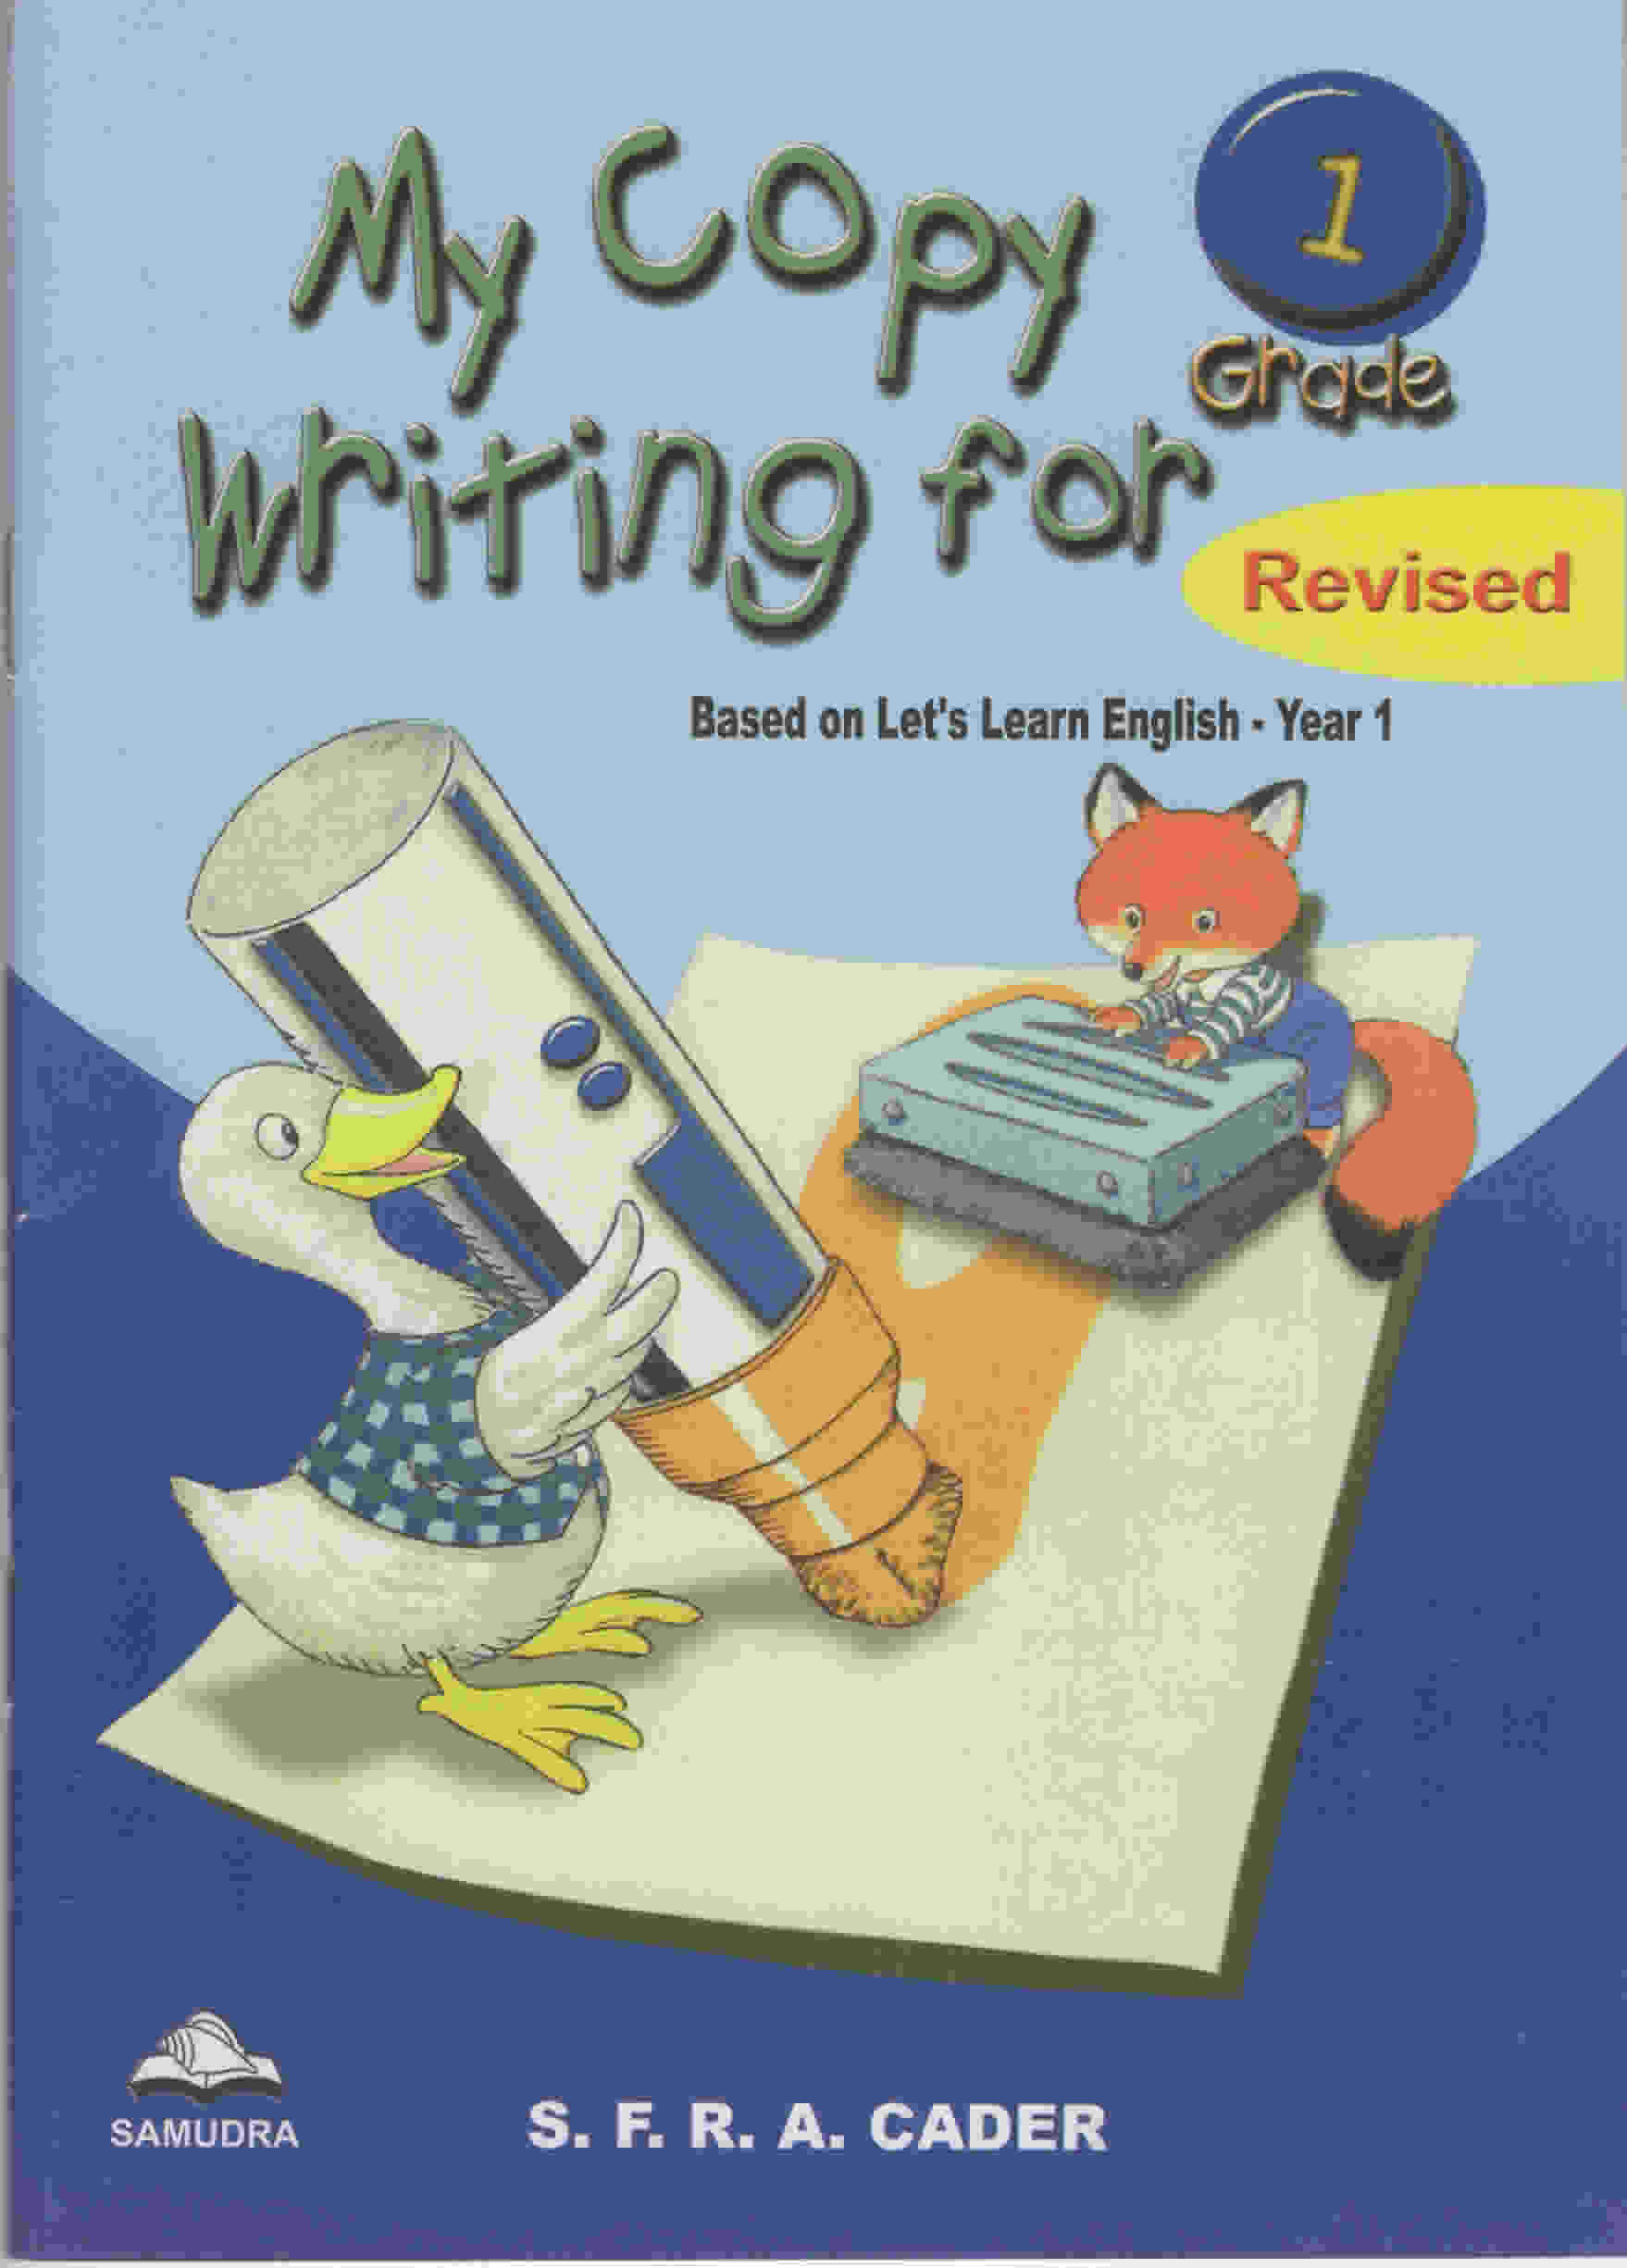 My Copy Writing for Grade 1 Revised